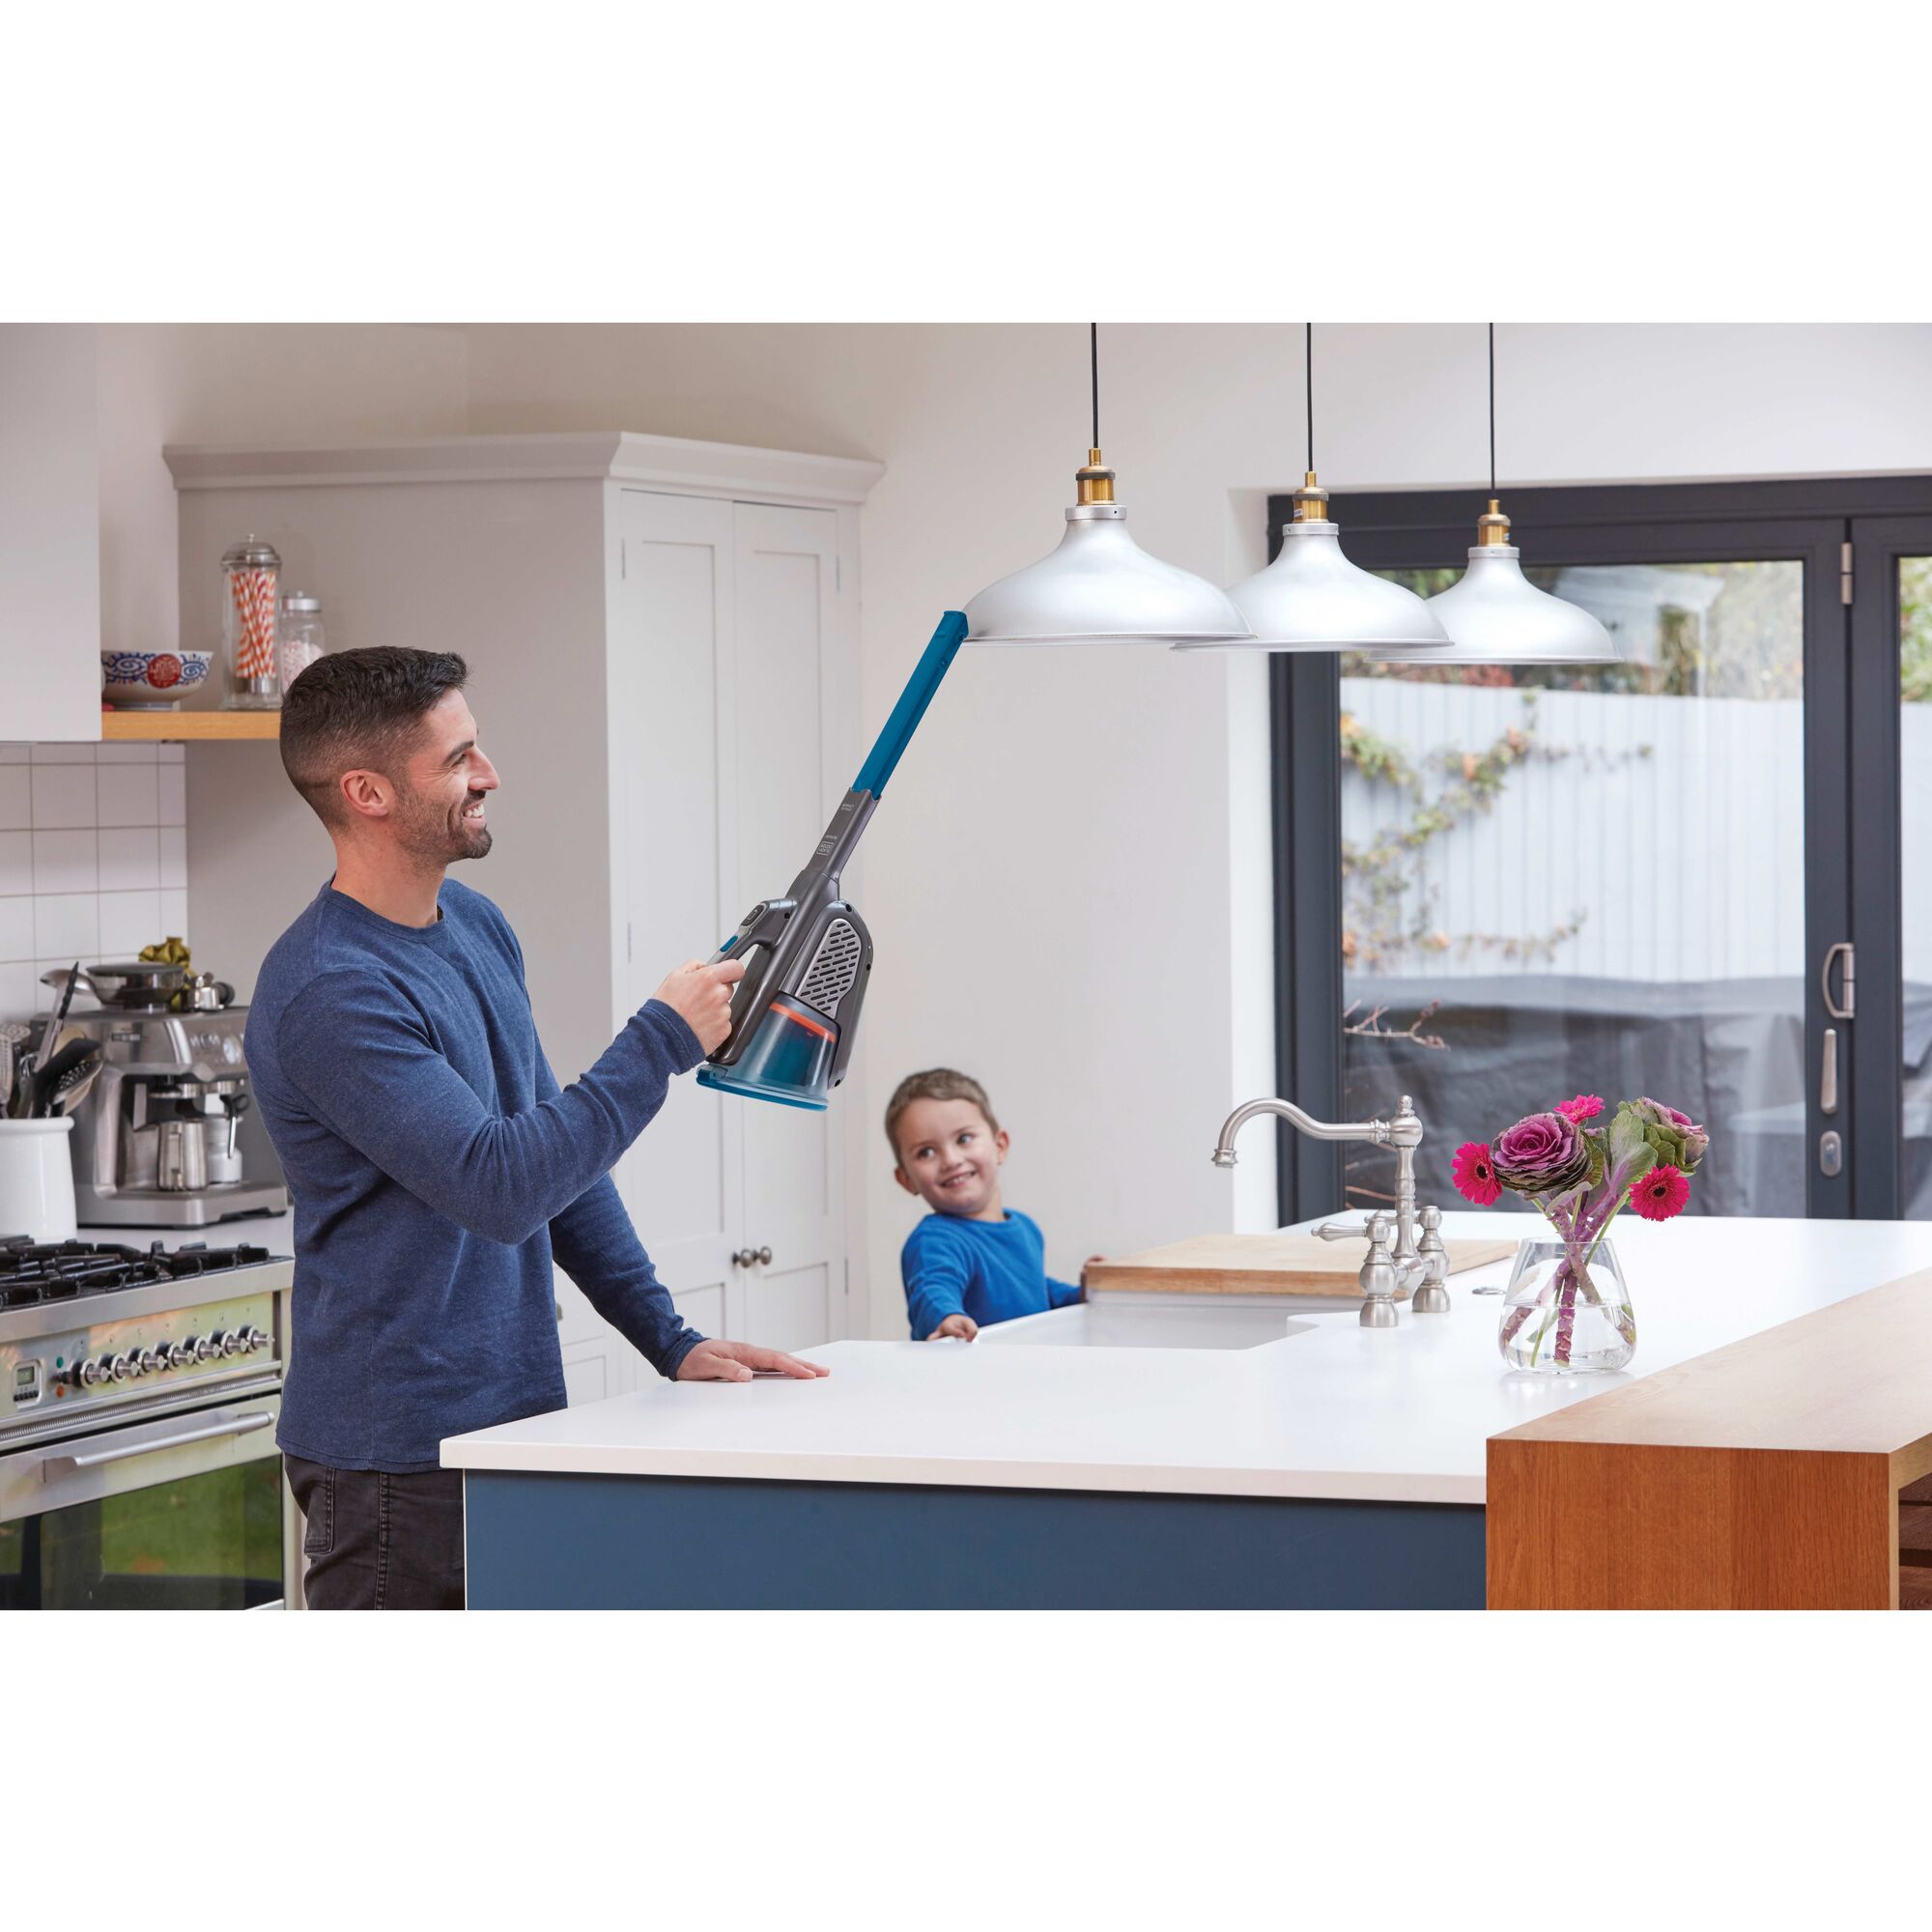 Man cleaning kitchen lamps with BLACK+DECKER dustbuster